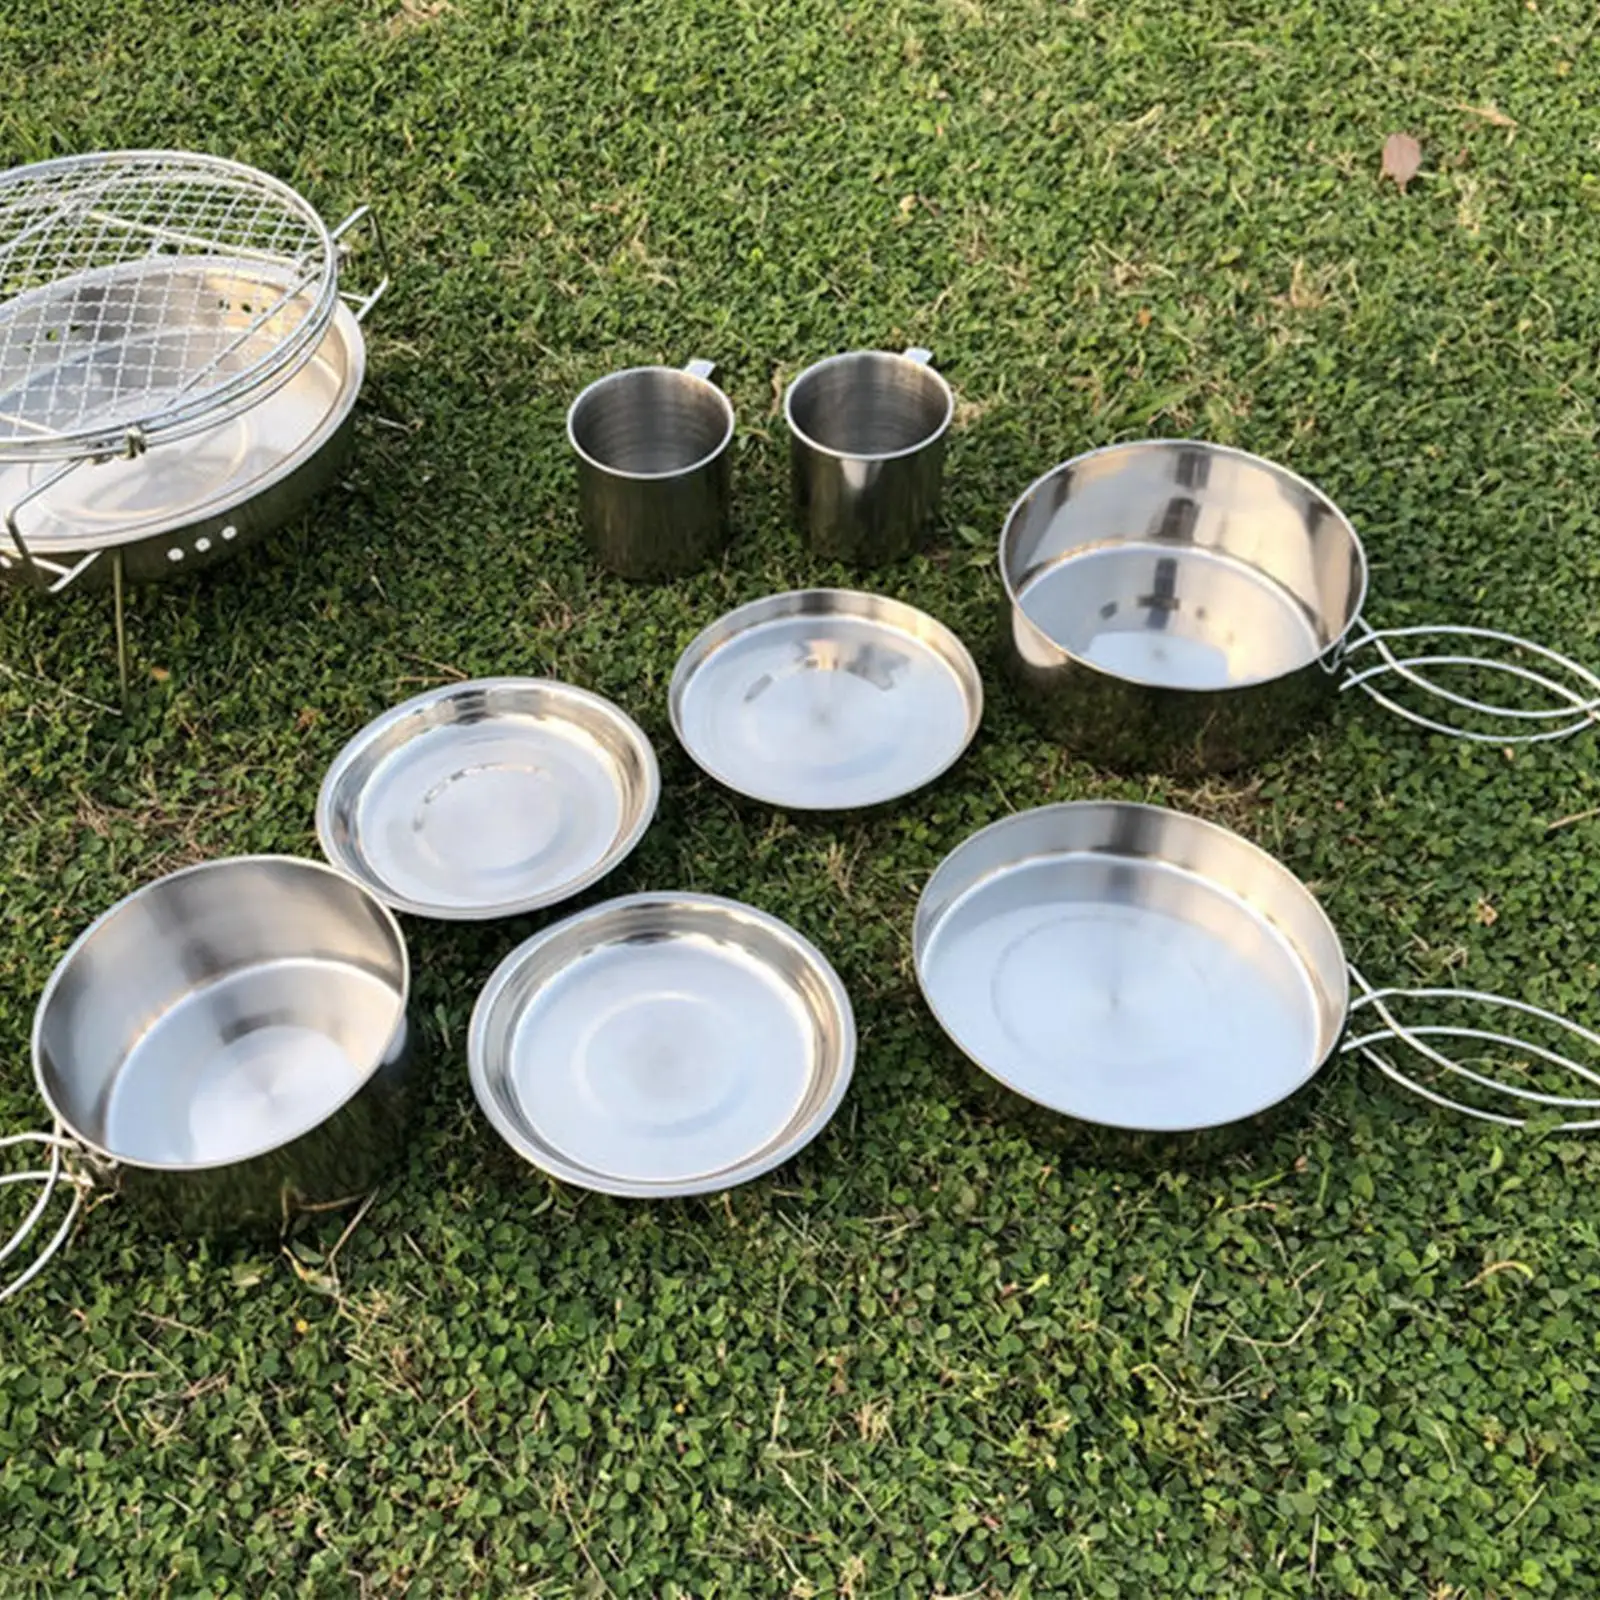 8x Outdoor Pot Plates and Cups Tableware Lightweight Camping Cookware Mess Kit for Kitchen Fishing Campfire Picnic Dinner